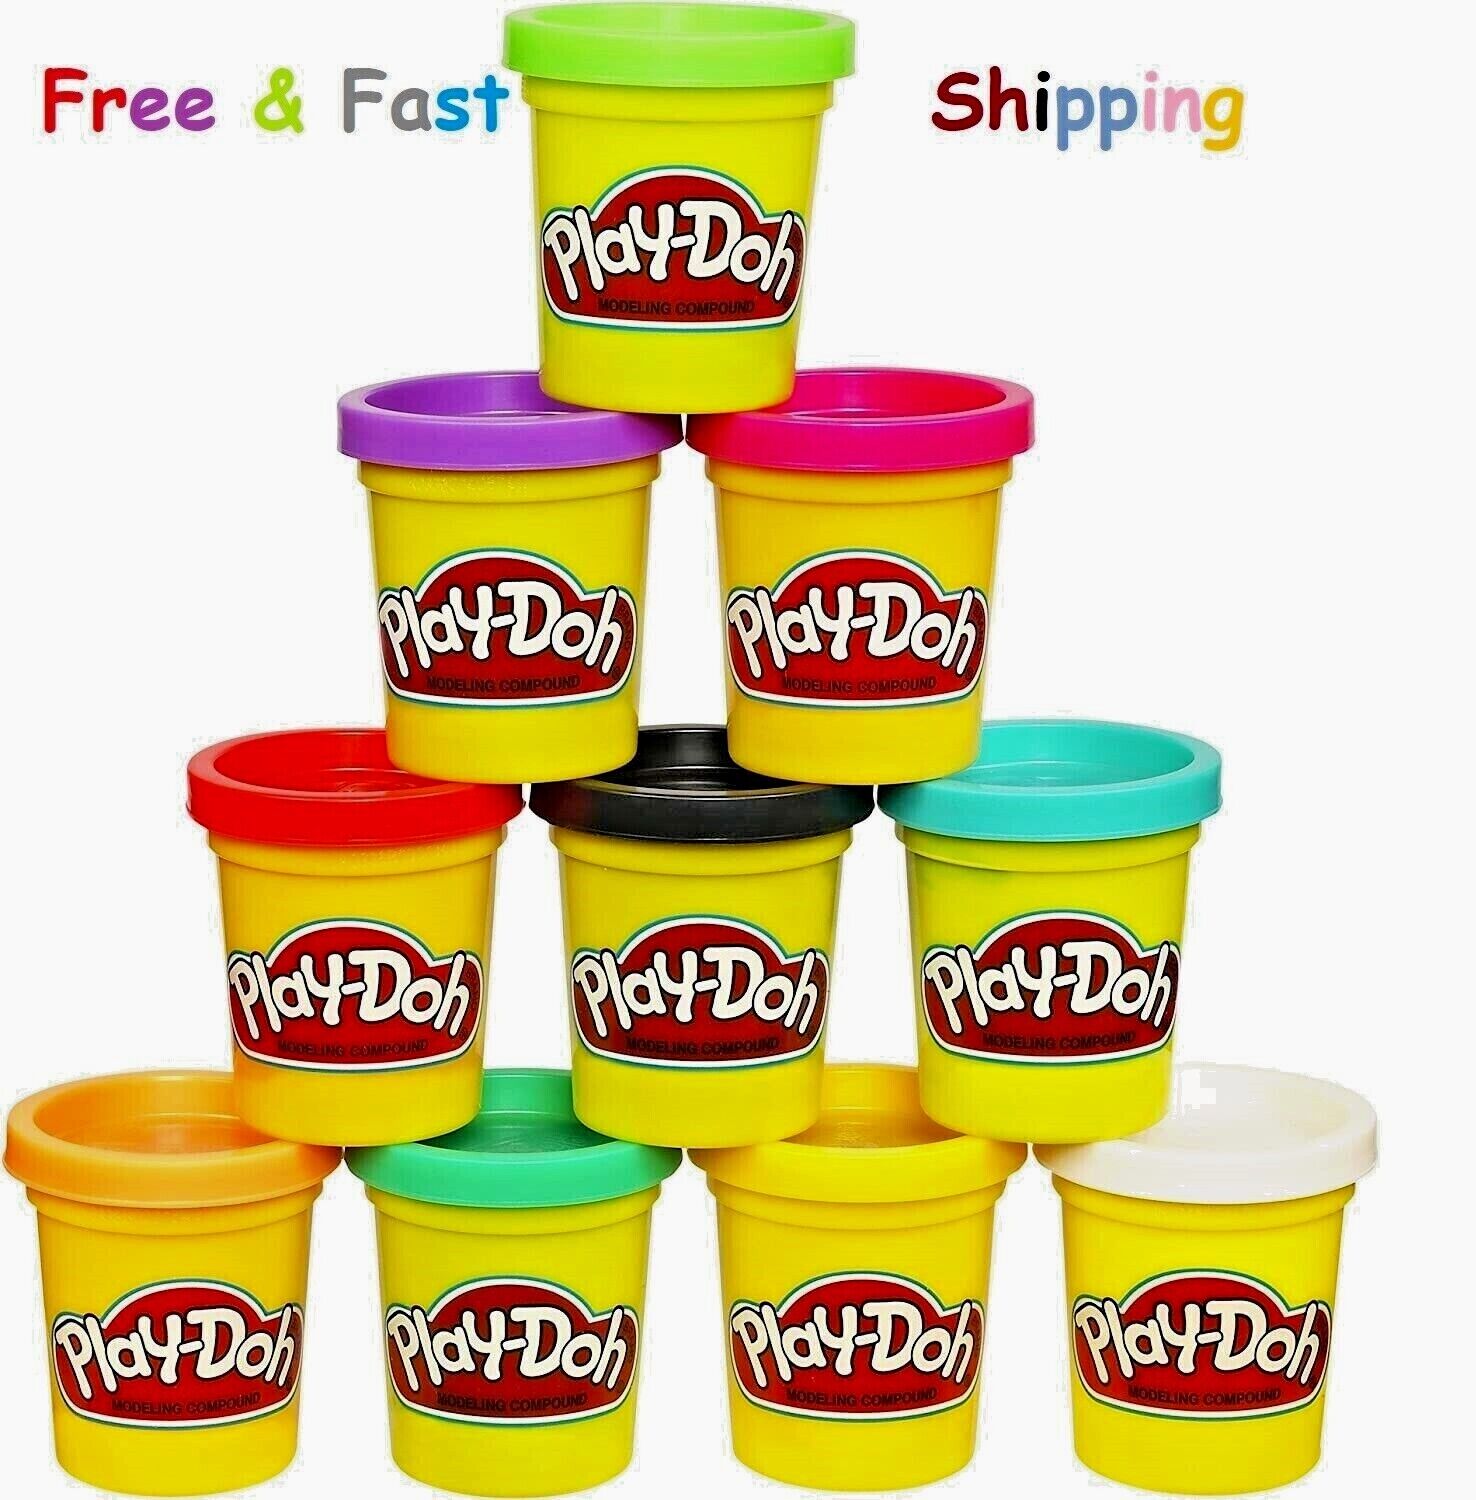 Play-doh Modeling Compound 10-pack Case Of Colors, Non-toxic, Assorted Color